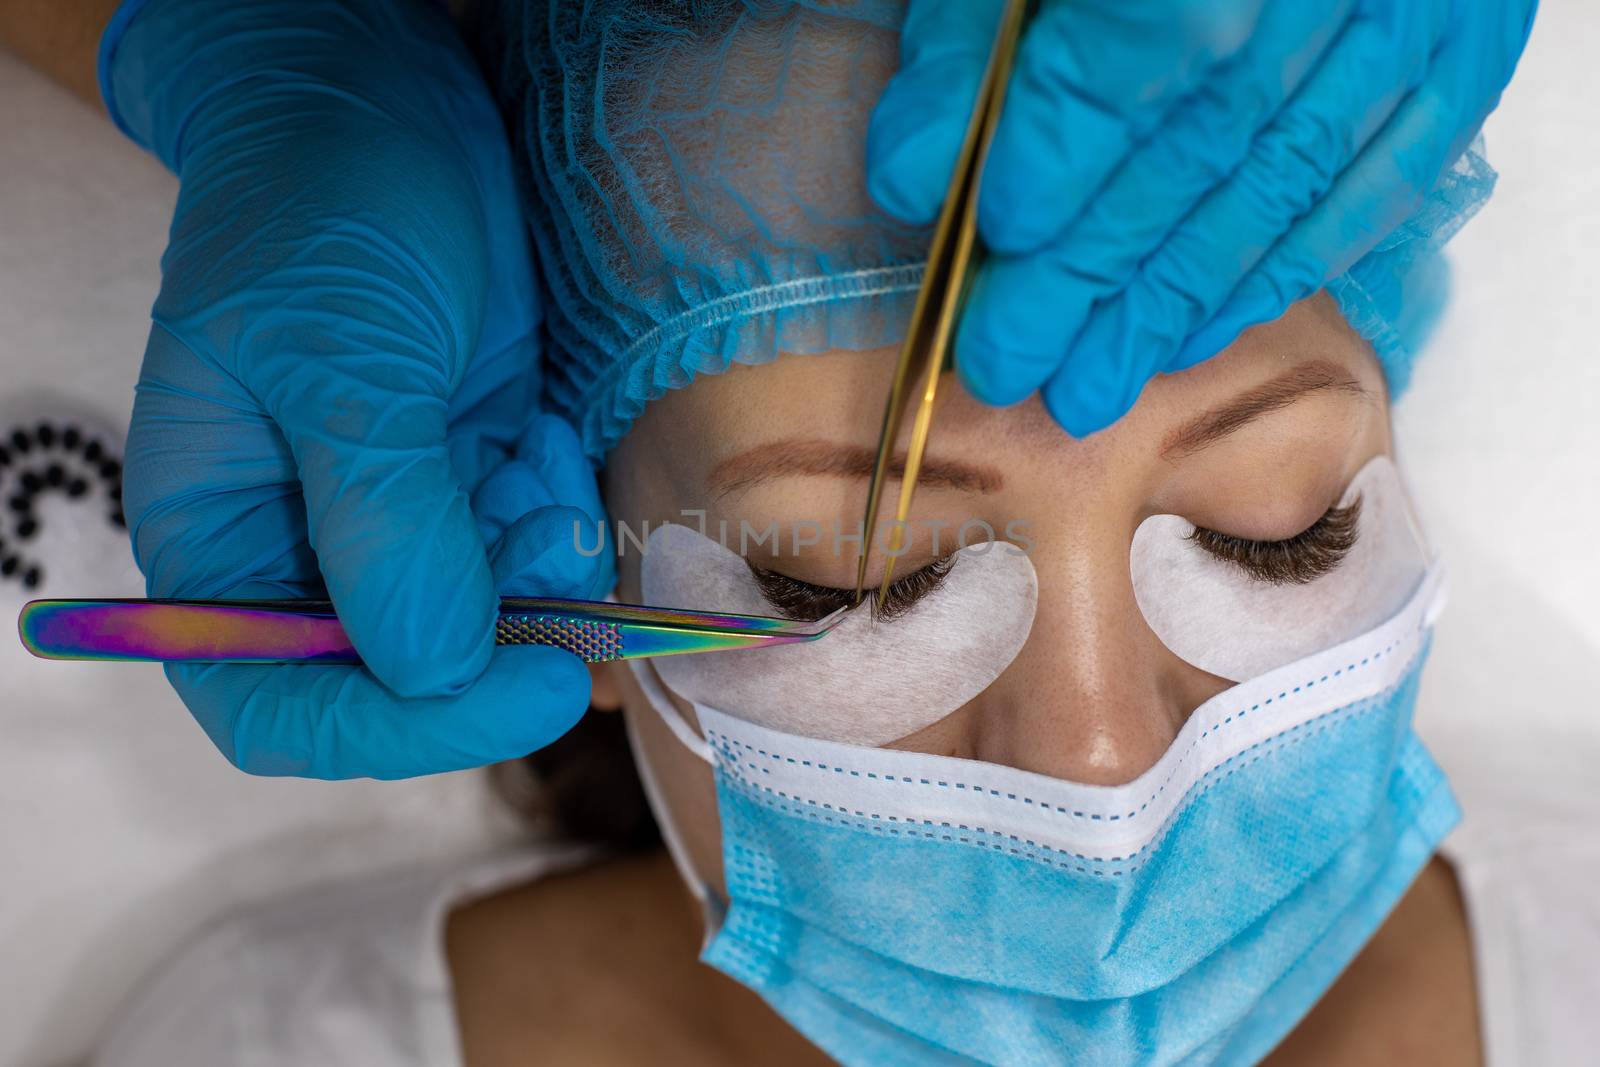 Treatment of Eyelash Extension during a pandemic with preventive by adamr